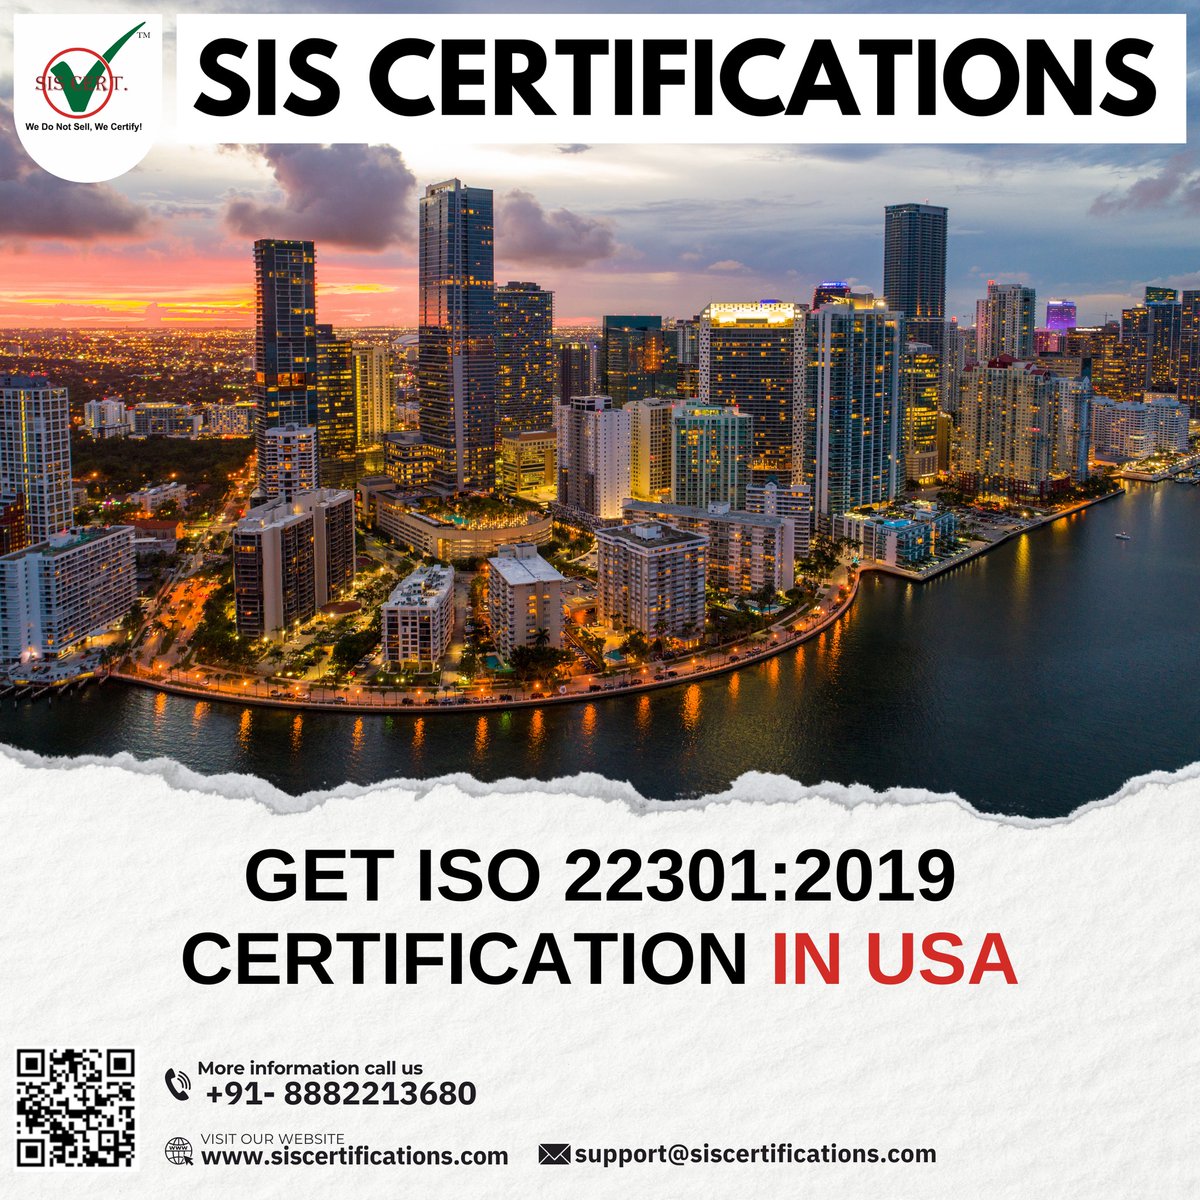 ISO 22301:2019 is a top priority for businesses in the USA as it helps them manage disruptions, increase resilience & maintain operational continuity. Visit: bit.ly/4antS0N, Call: 8882213680, Email: support@siscertifications.com
#SISCertifications #iso22301 #BCMS #USA